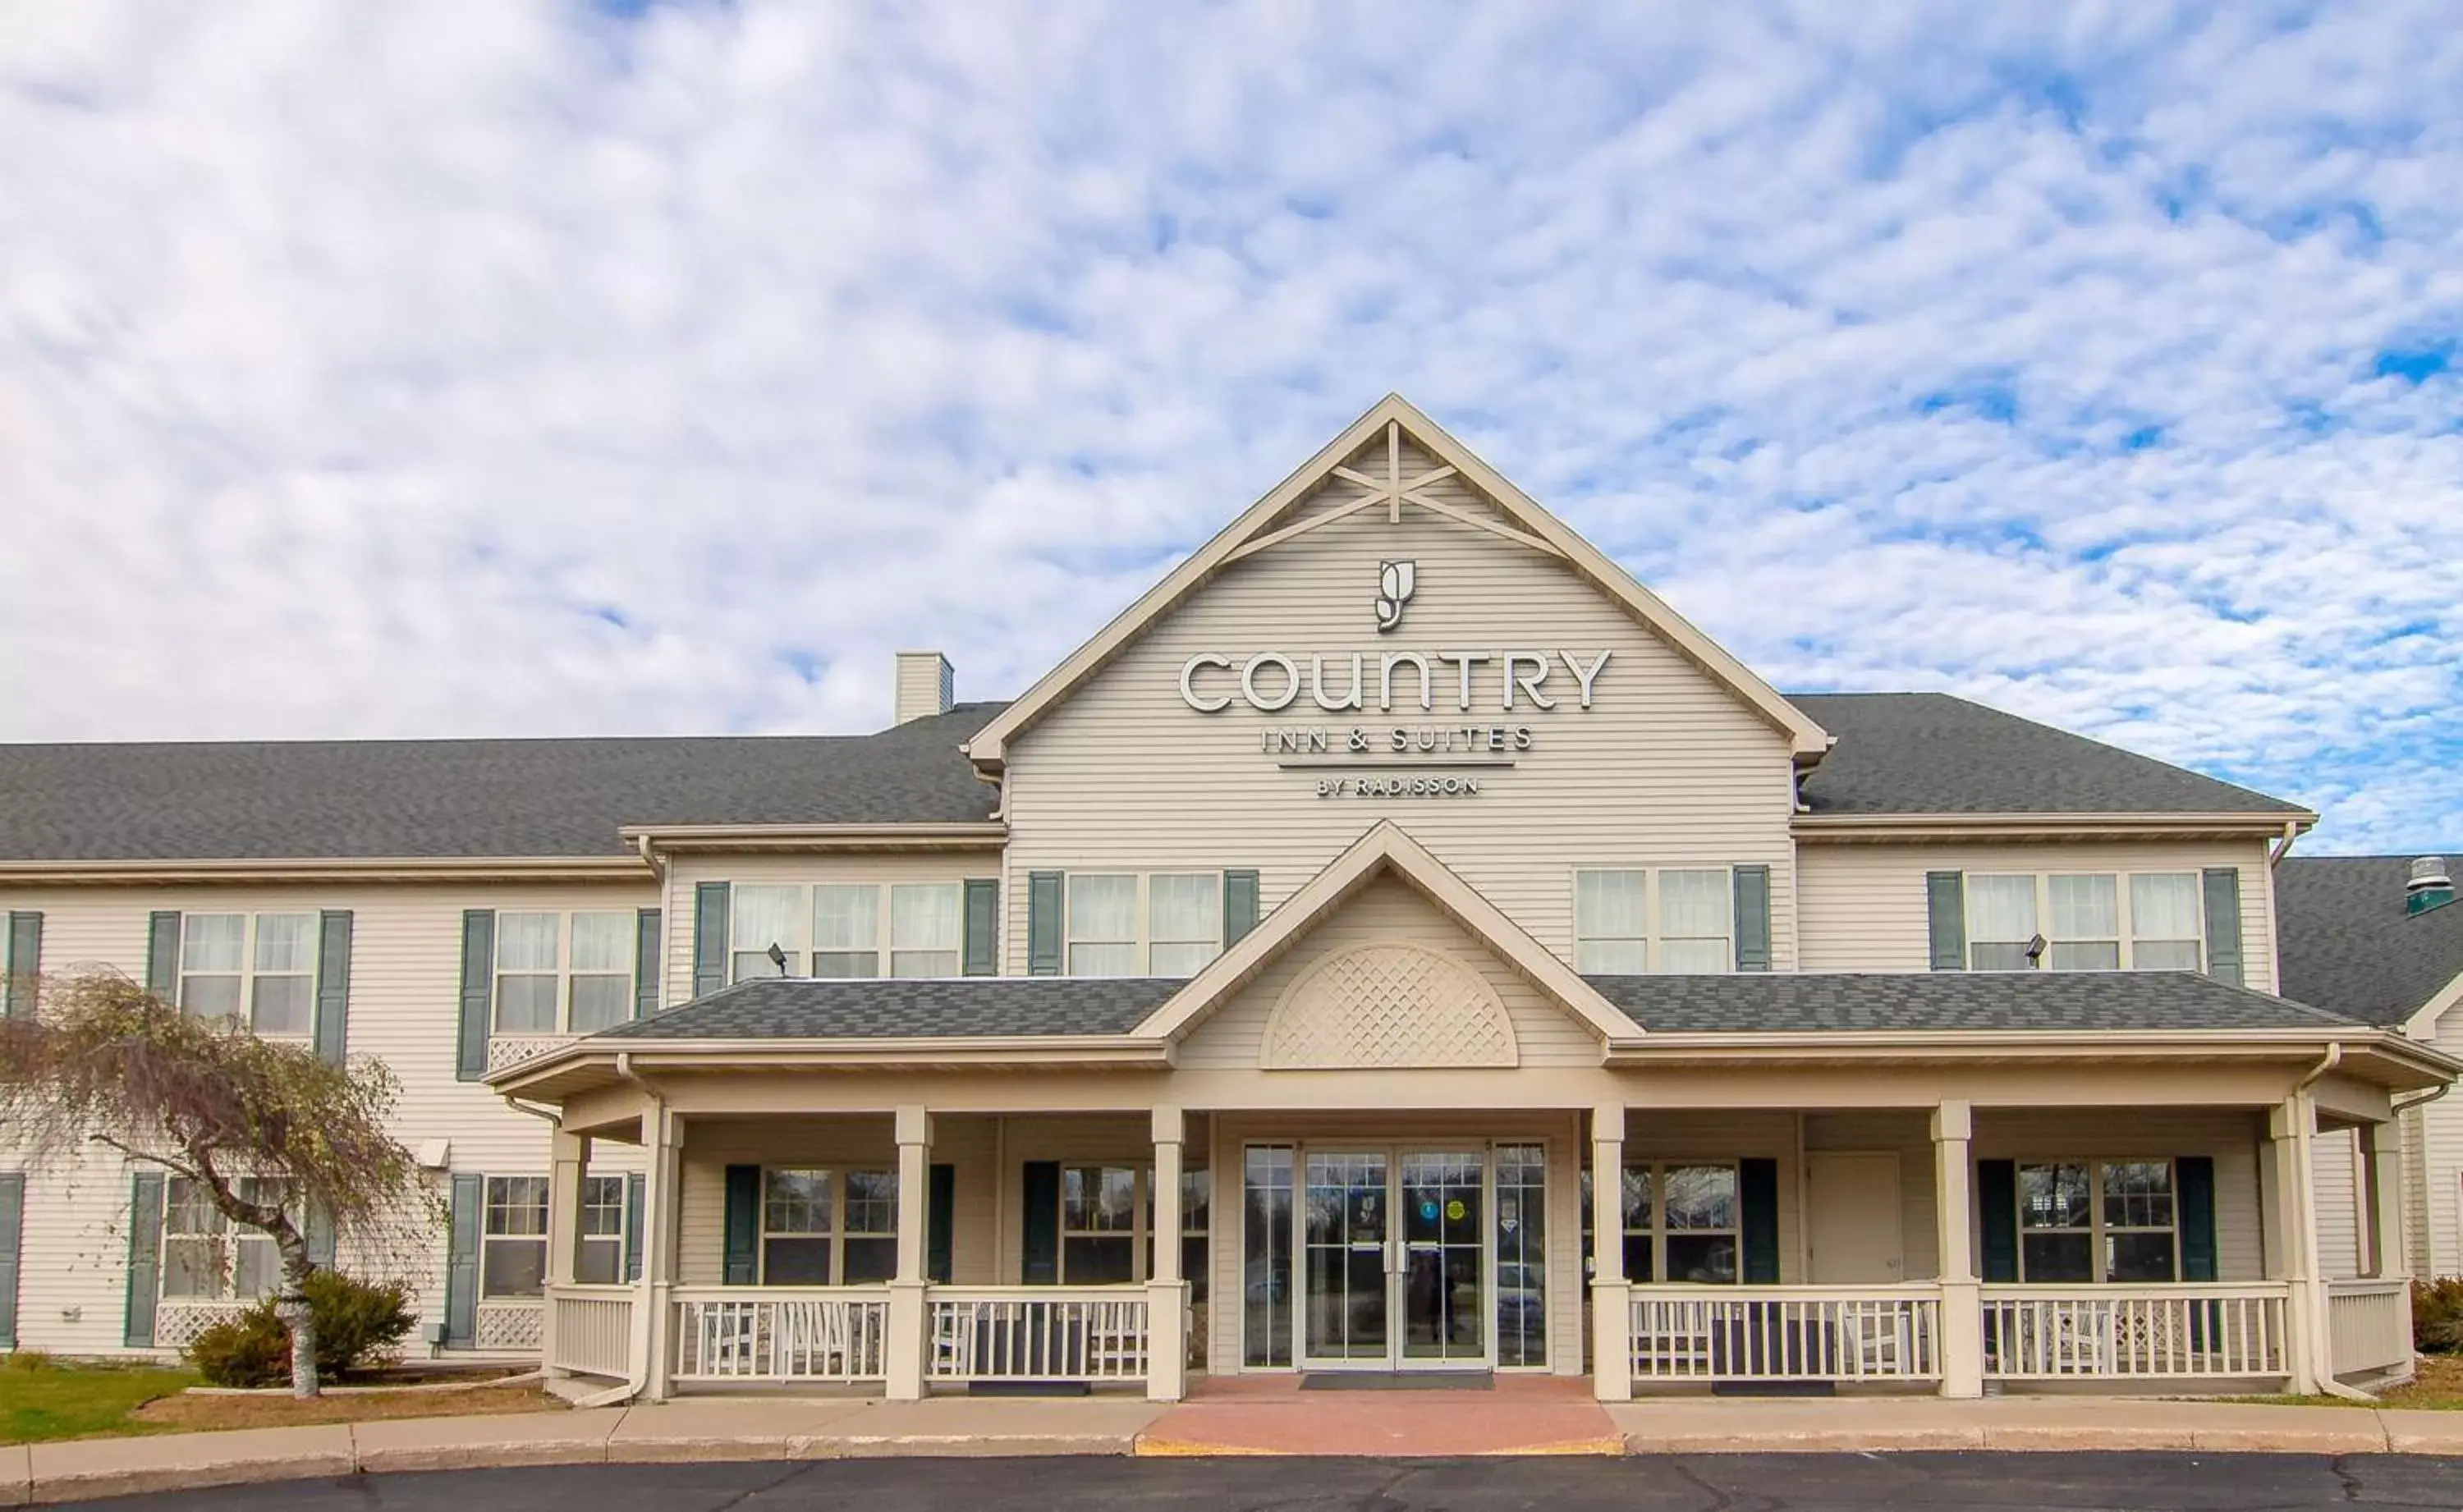 Property building in Country Inn & Suites by Radisson, Stockton, IL